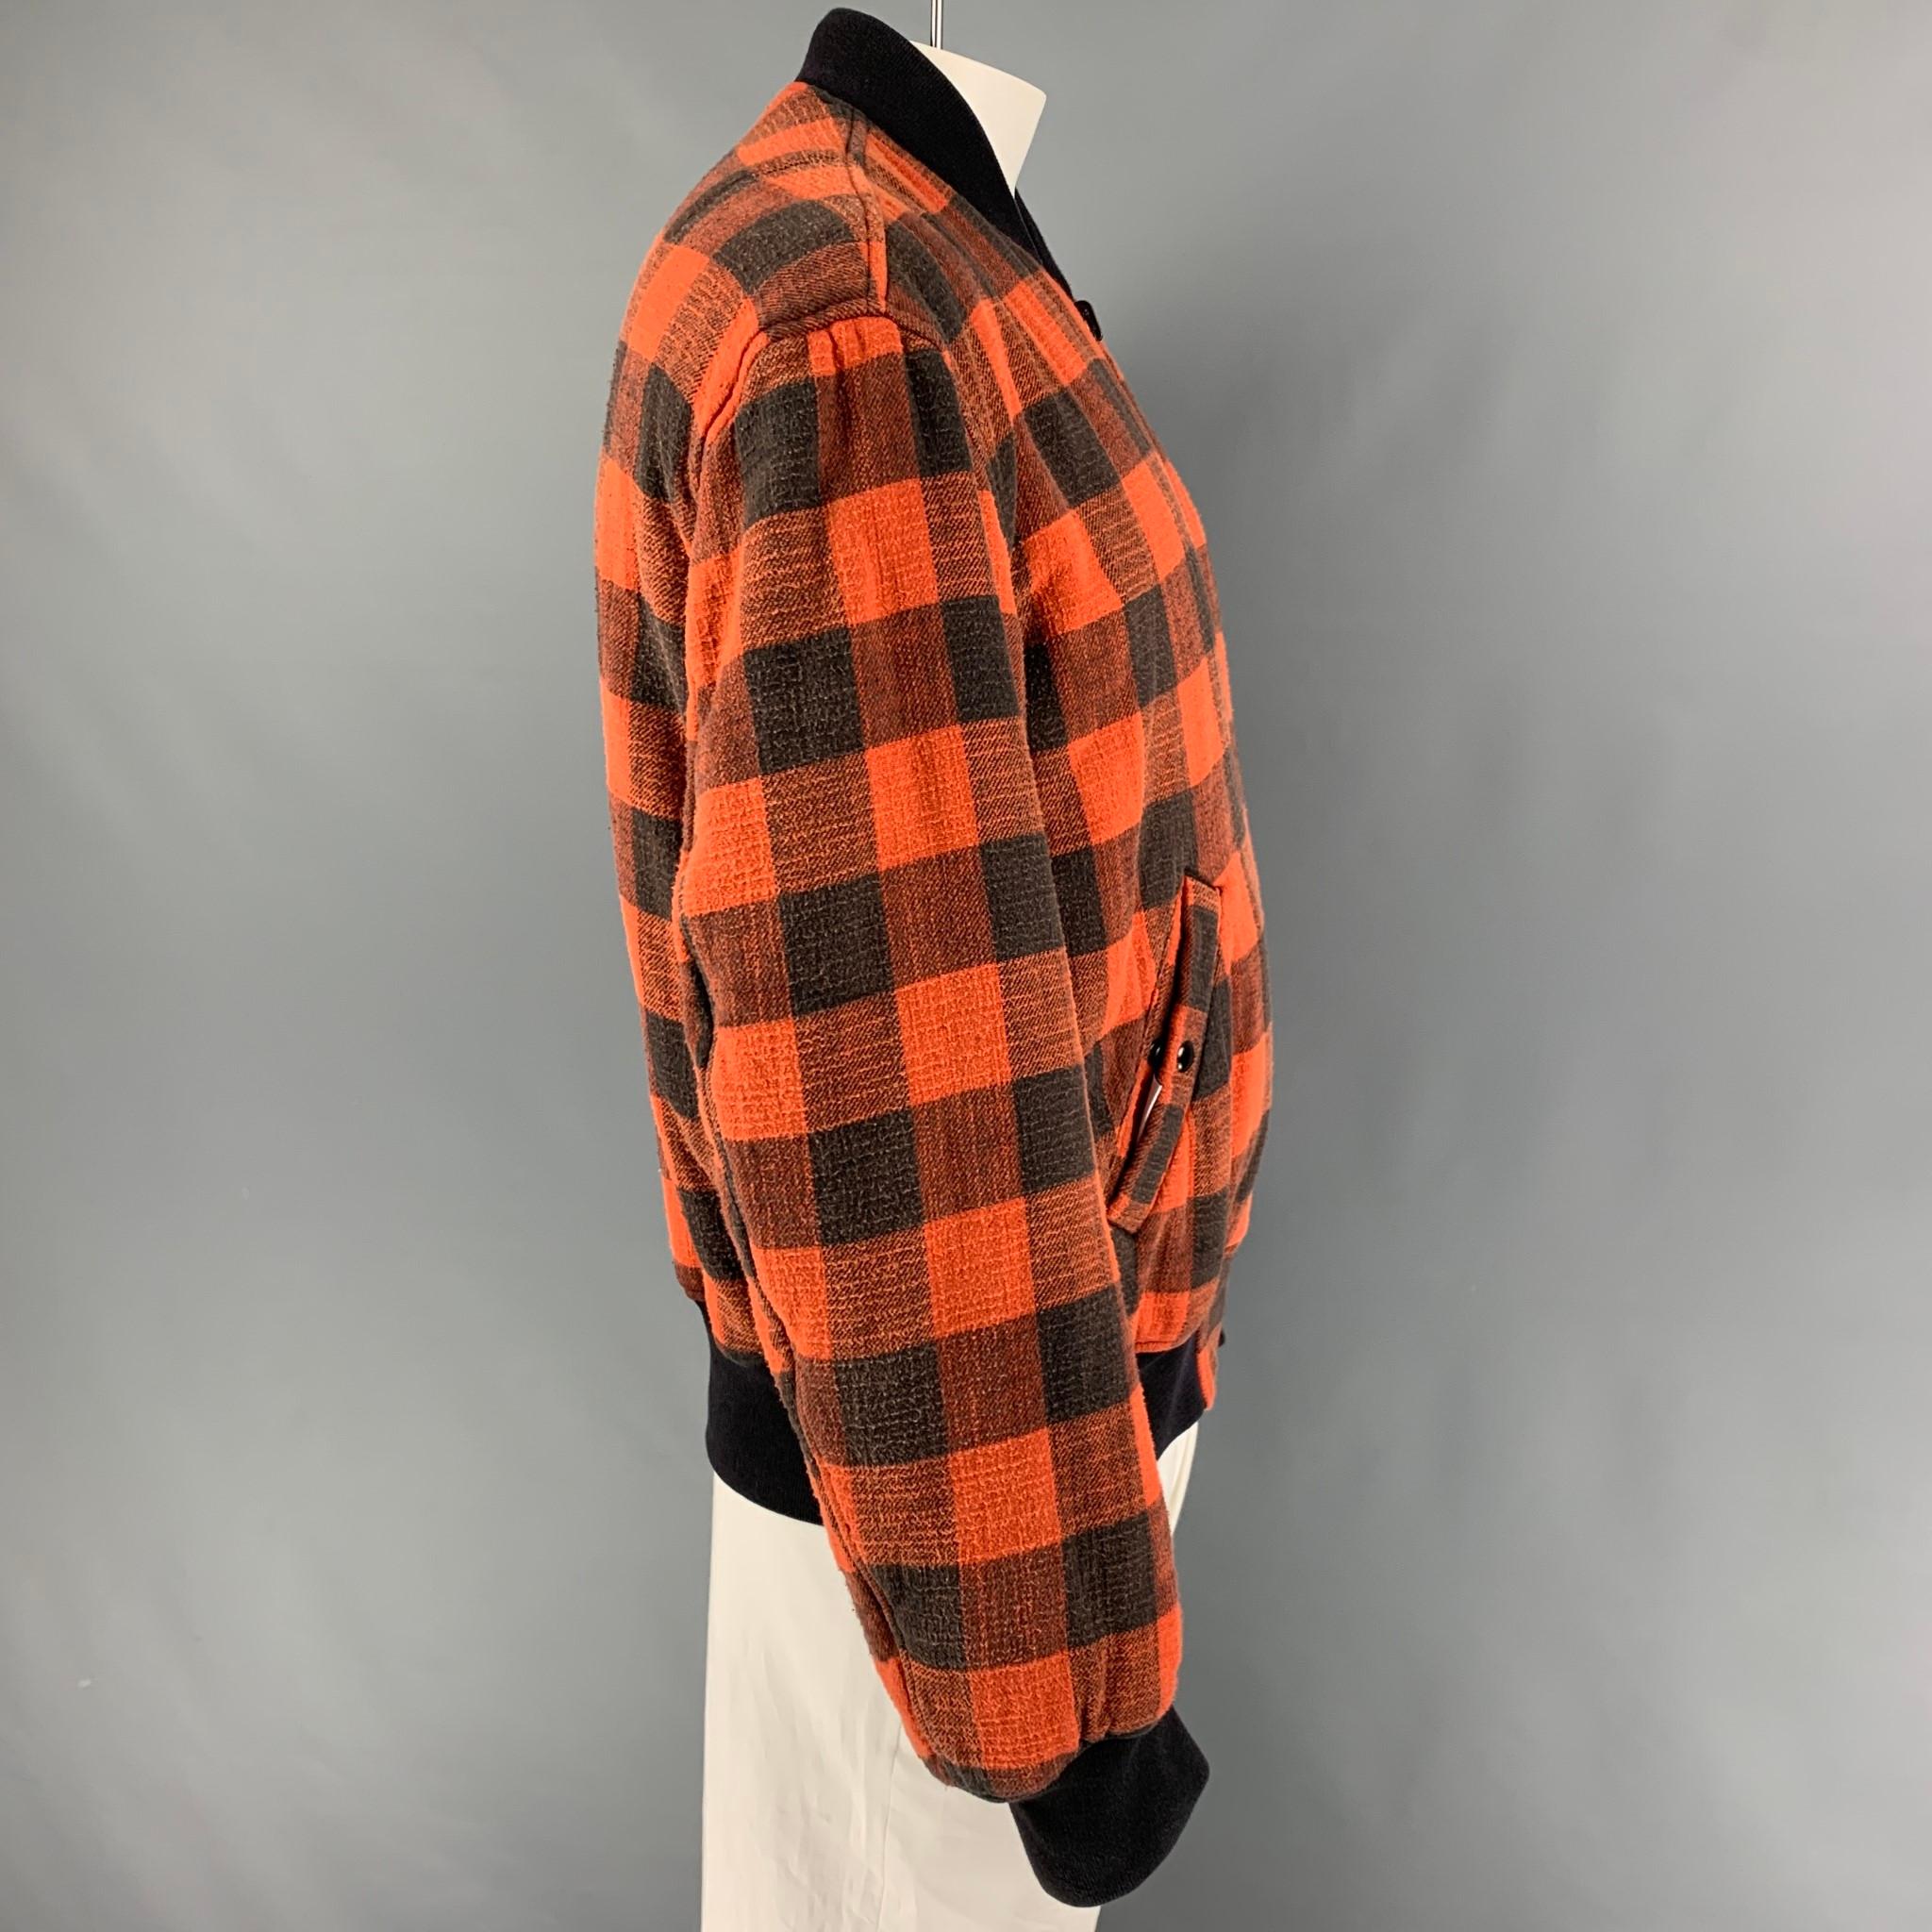 R13 jacket comes in a orange & black plaid cotton featuring a reversible style, oversized, bomber, ribbed hem, front pockets, and a full zip up closure. 

Very Good Pre-Owned Condition.
Marked: M

Measurements:

Shoulder: 22.5 in.
Chest: 50